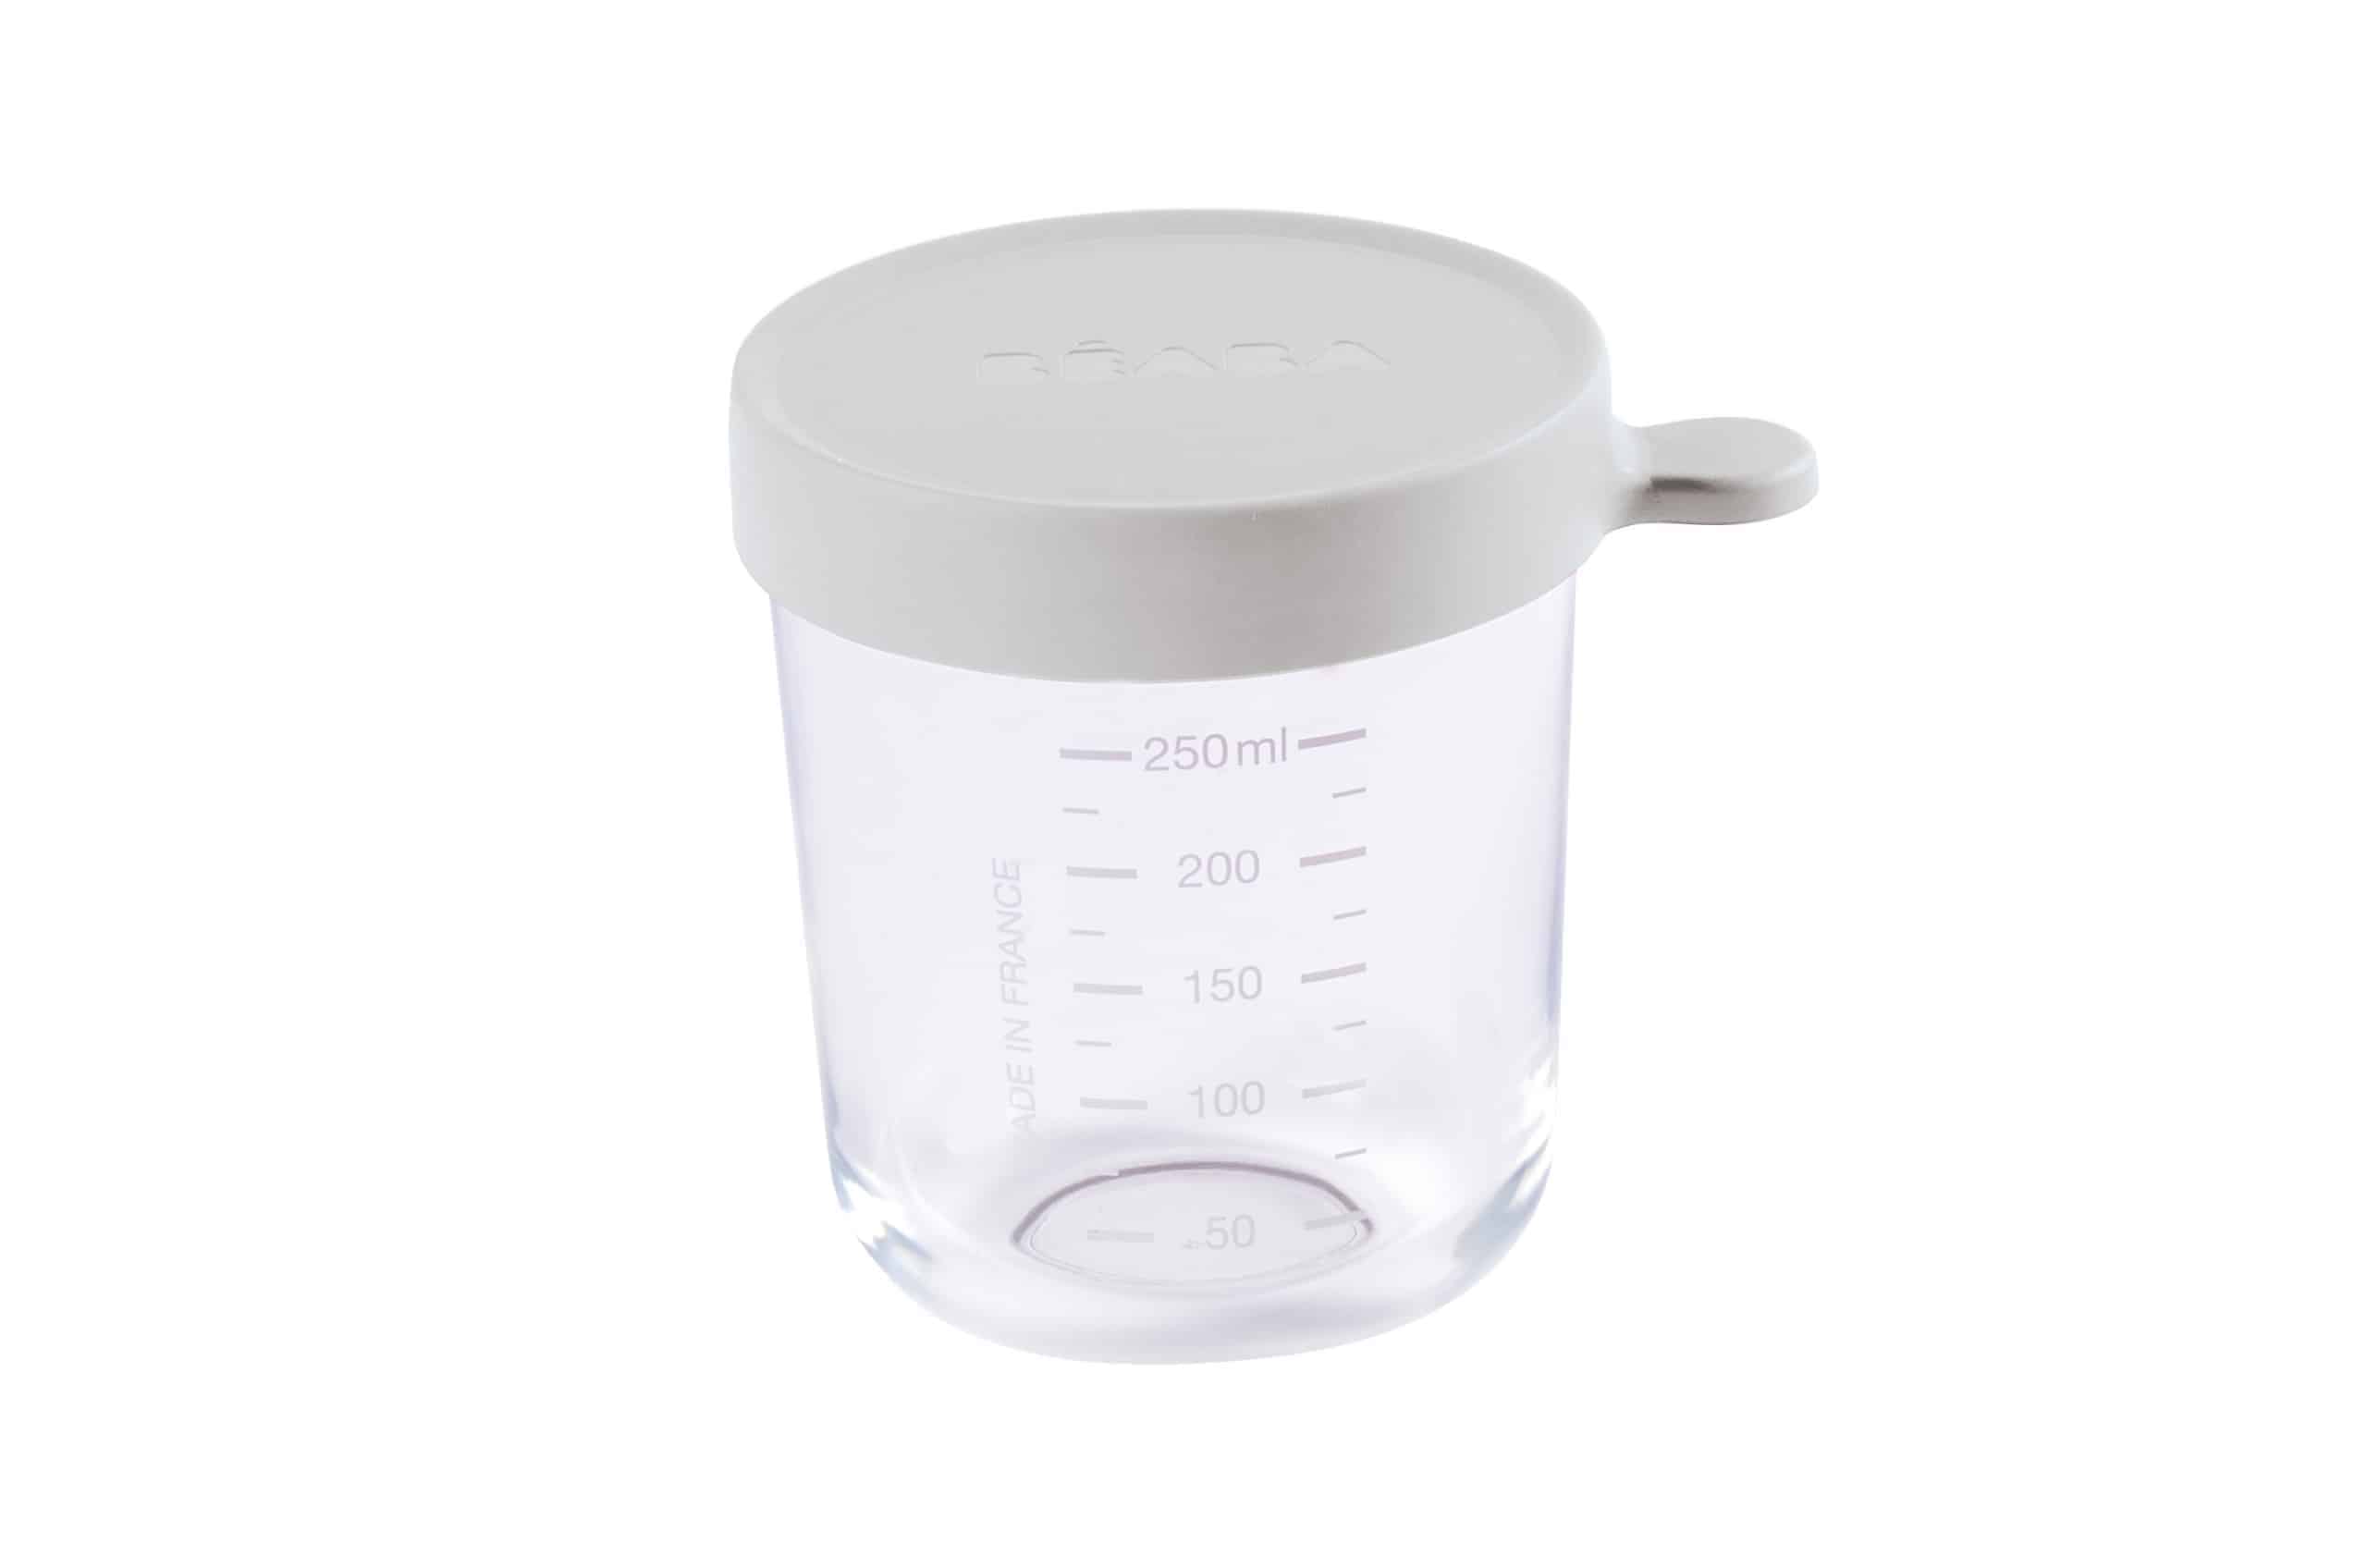 Beaba Glass & Silicone Container in Cloud 8 oz